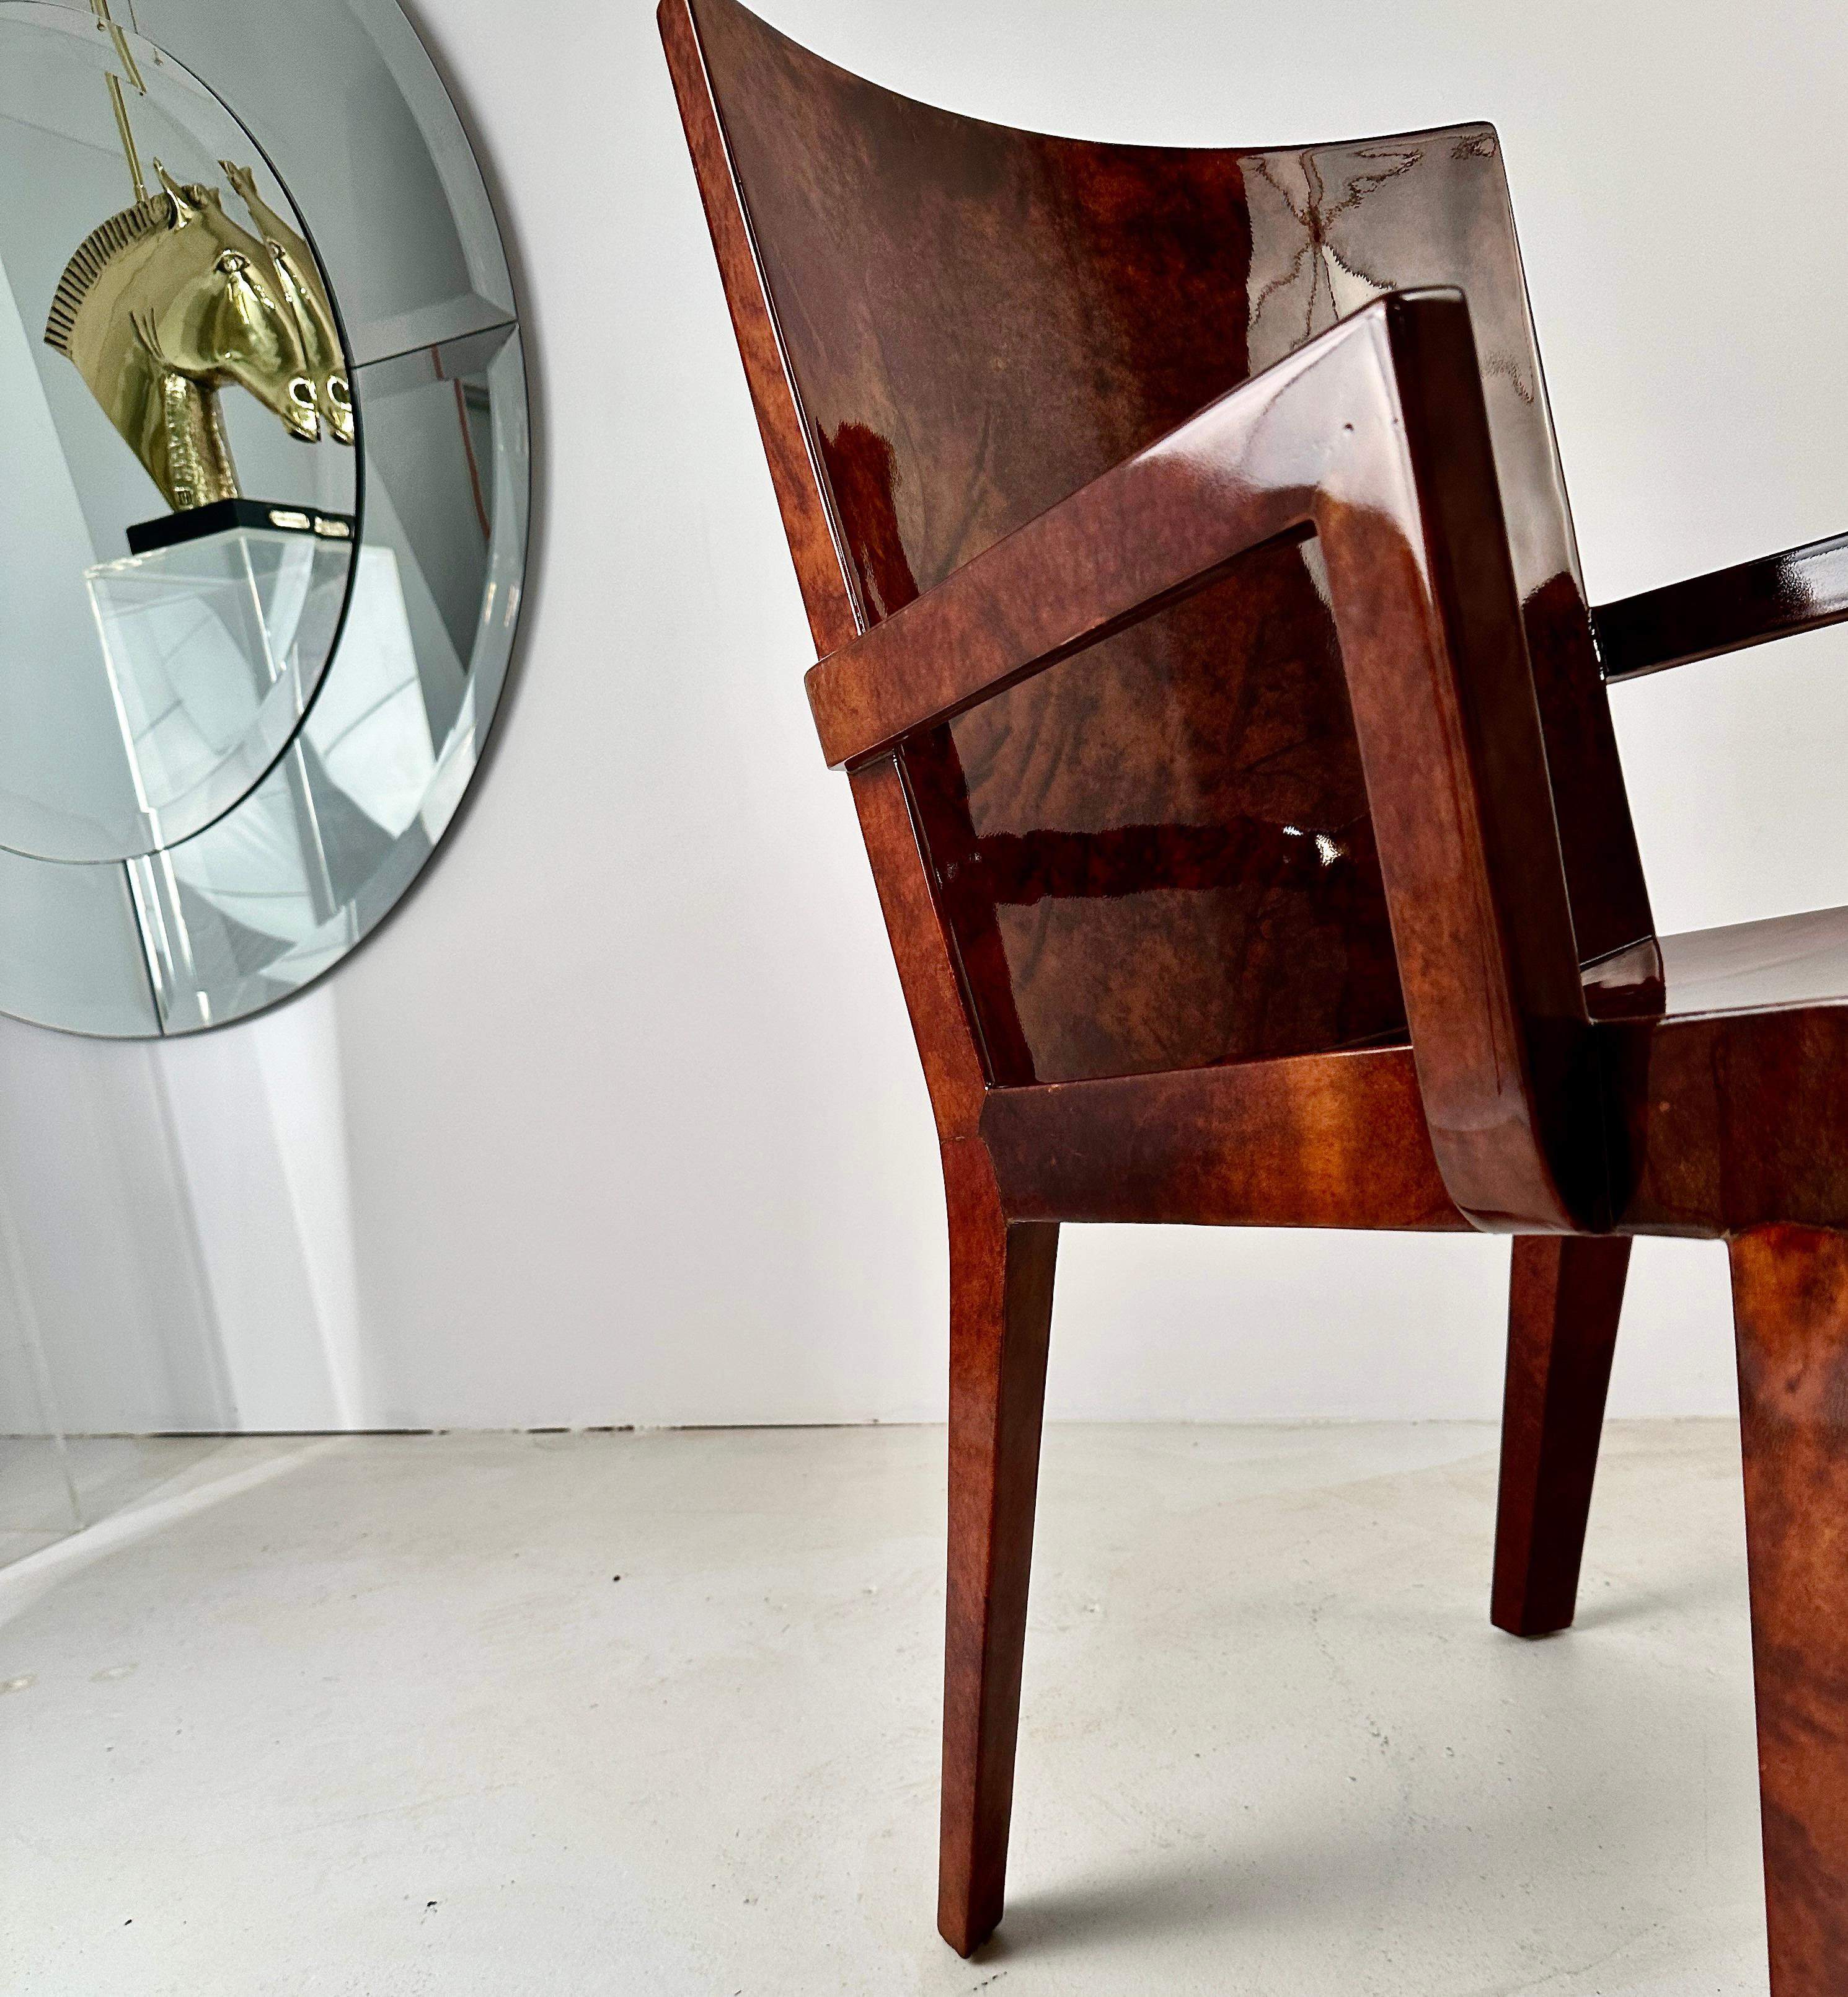 Karl Springer's lacquered goat skin pieces are amongst his most impressive. Springer, well known for outstanding quality and attention detail, produced the JMF chairs starting in 1980 in a number of custom finishes. This example features a figured